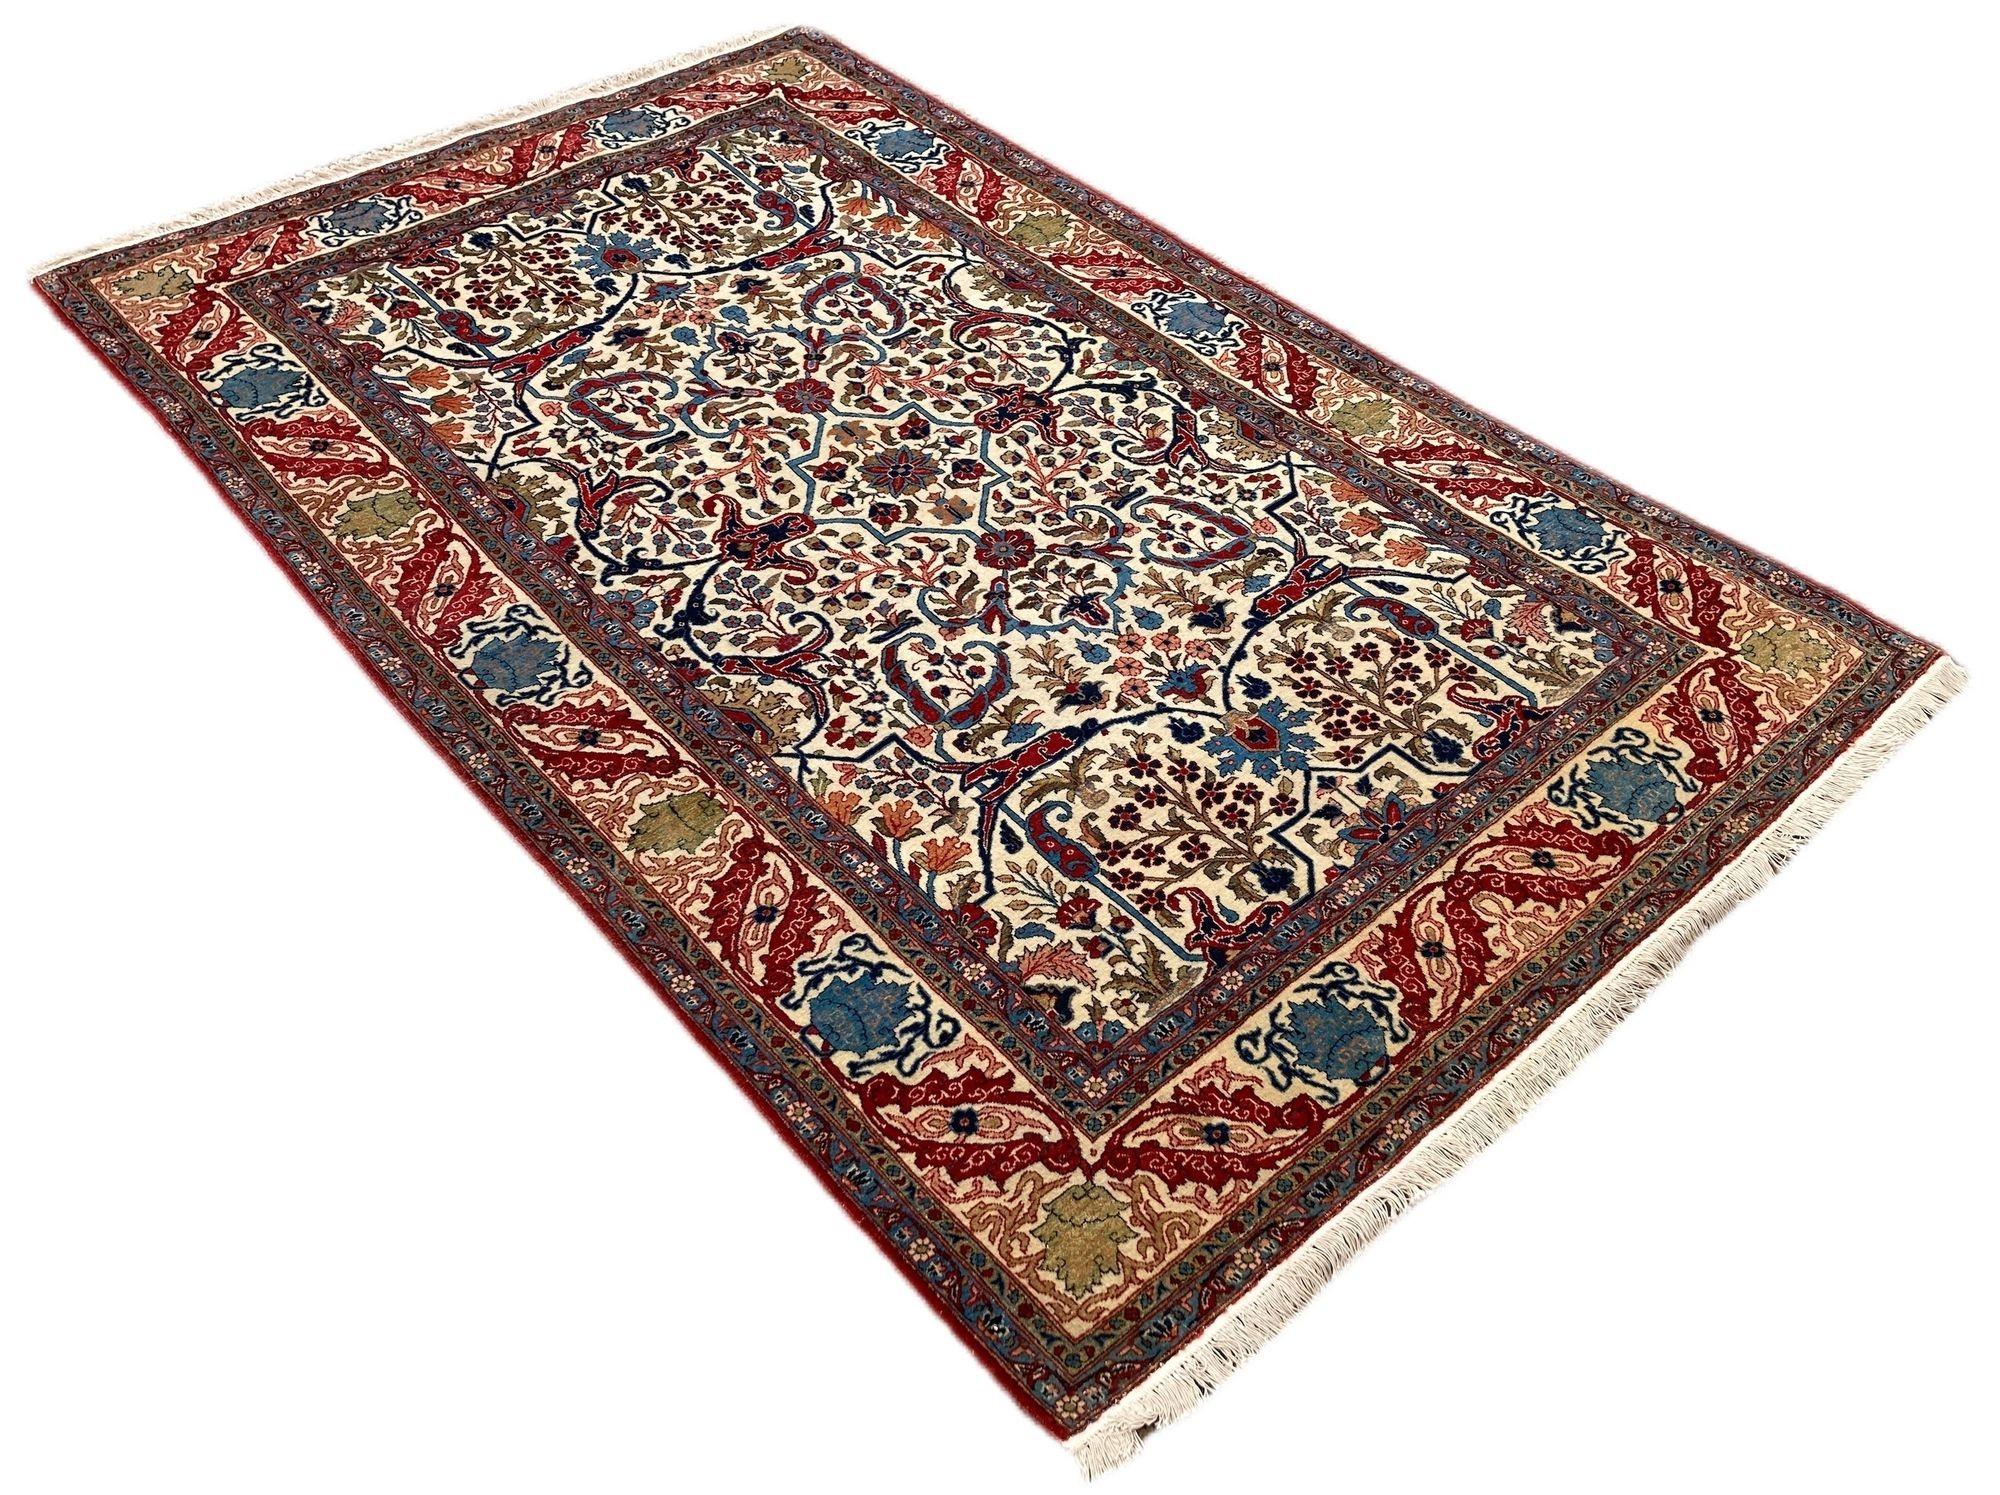 Antique Qum Rug 2.10m x 1.36m In Good Condition For Sale In St. Albans, GB